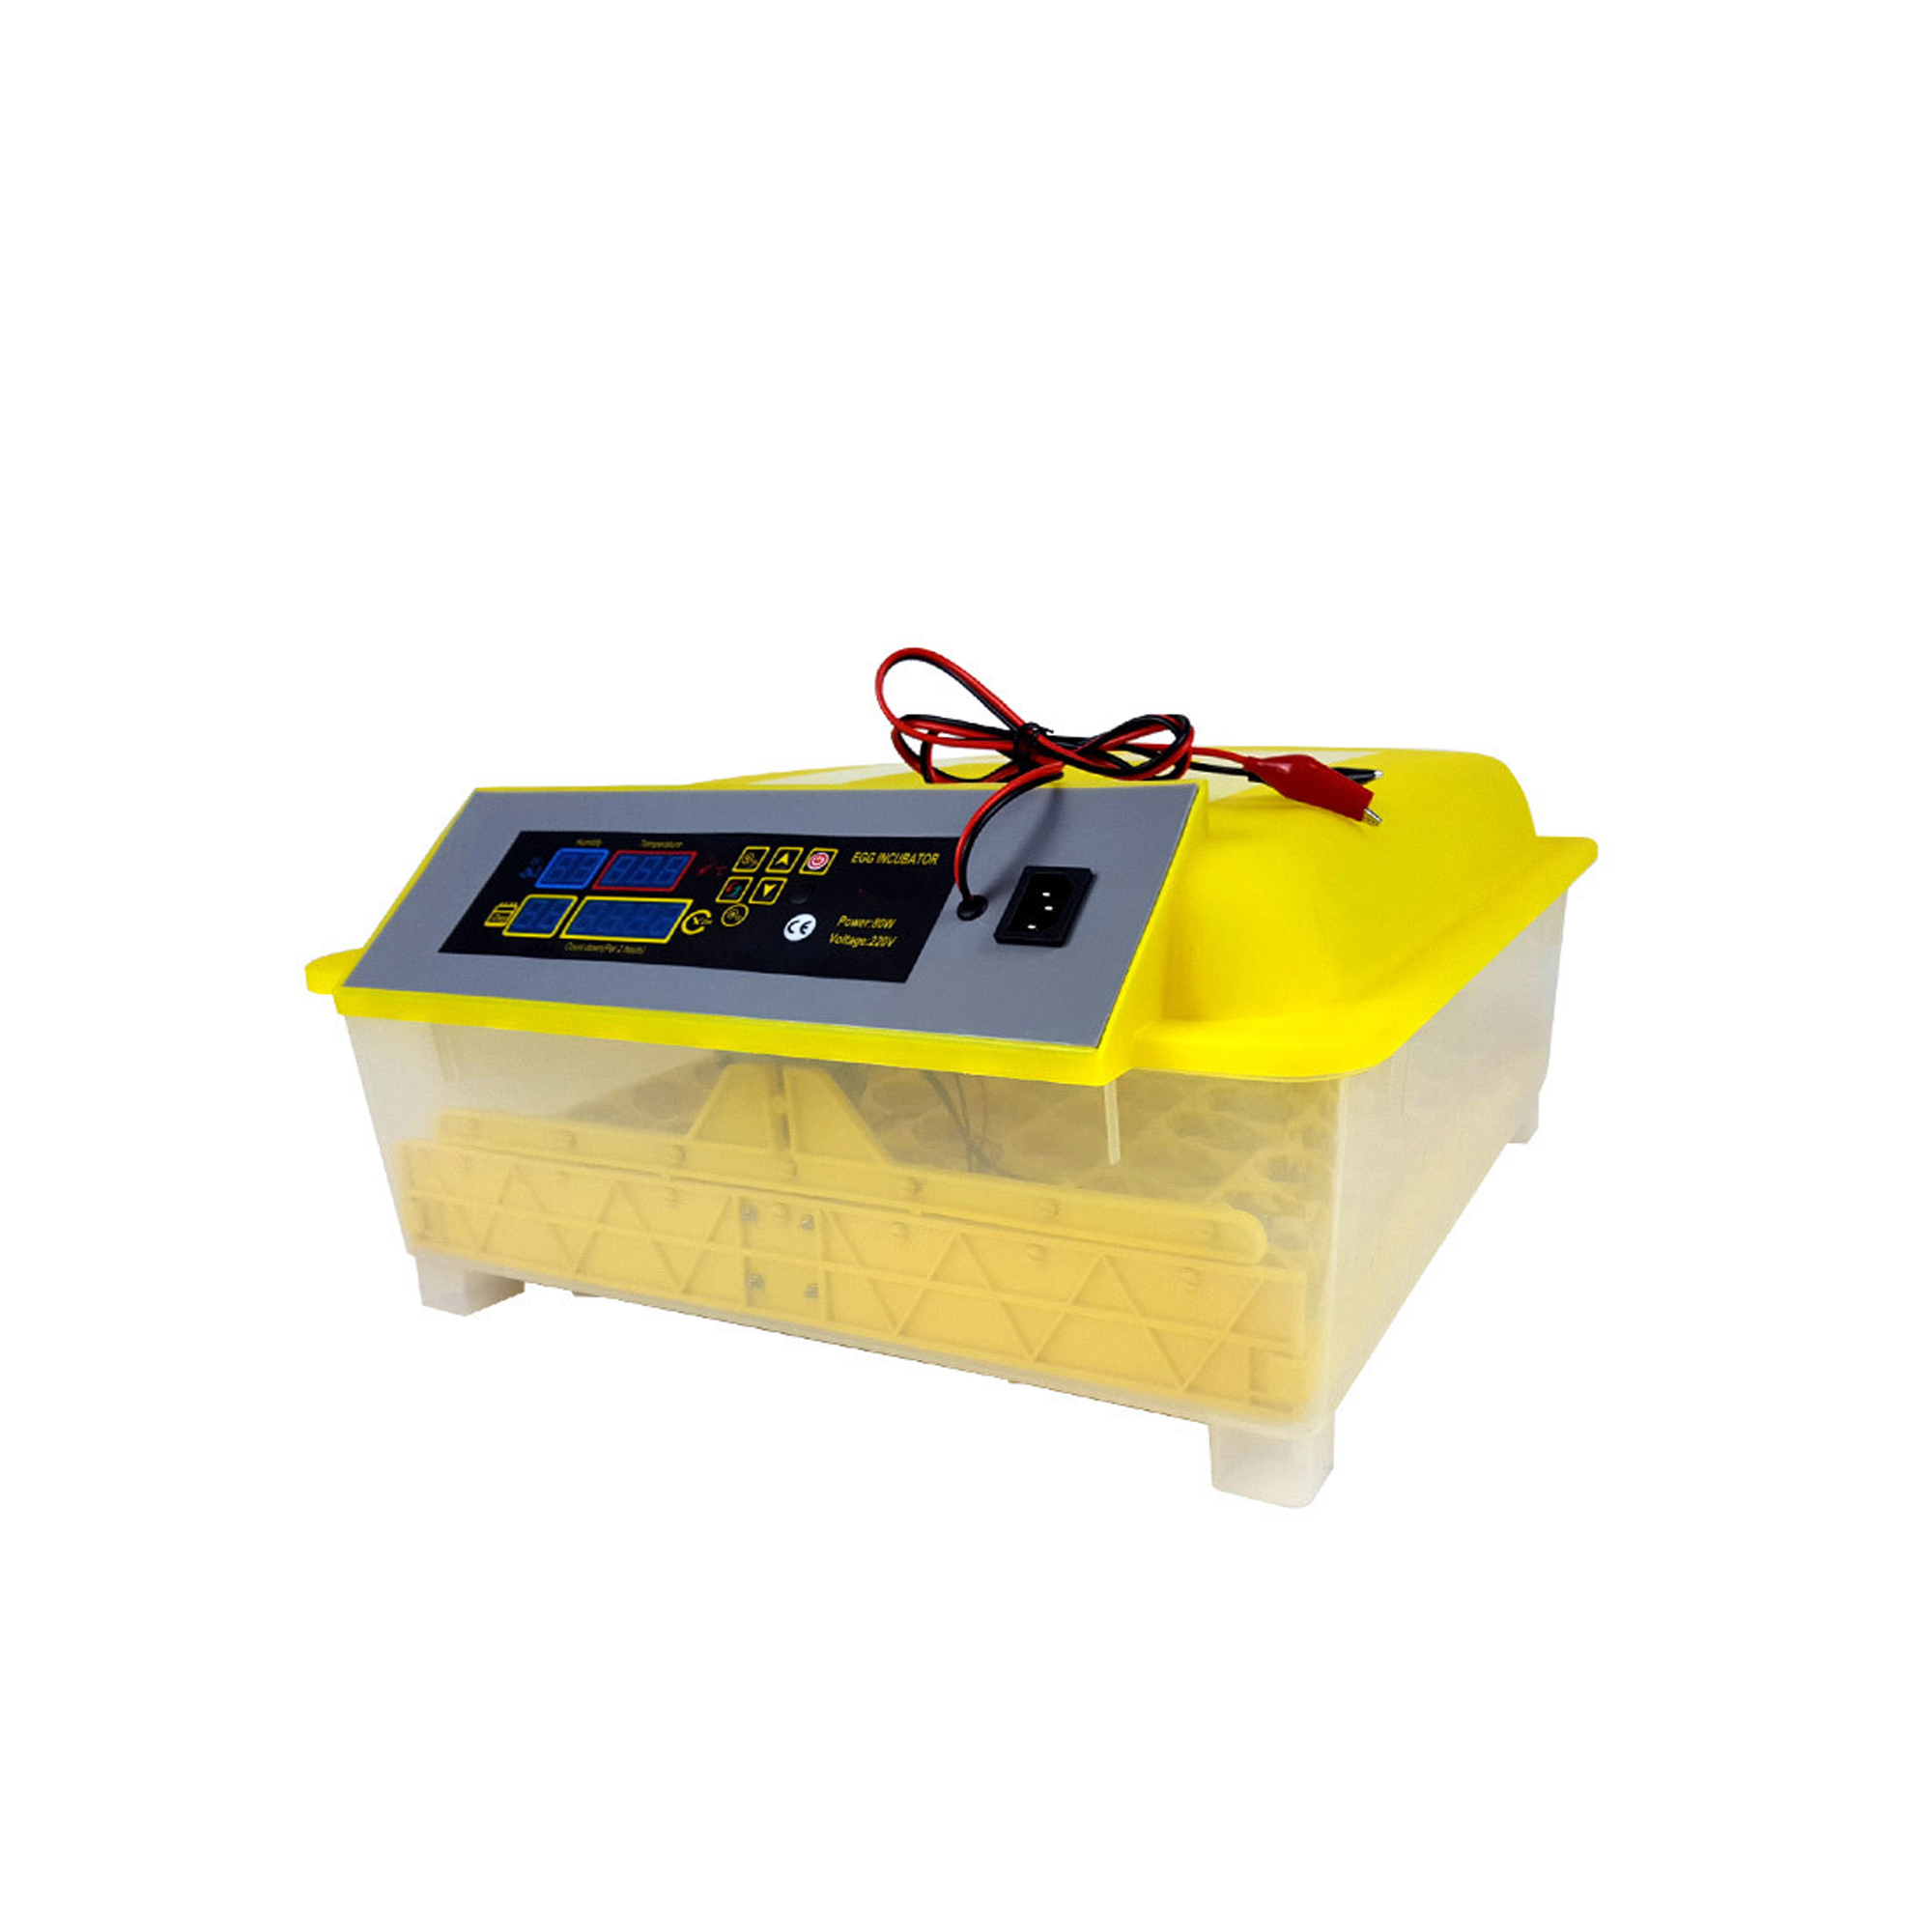 Nade YZ8-48 dual power supply Fully automatic intelligent household aquaculture equipment constant temperature incubator